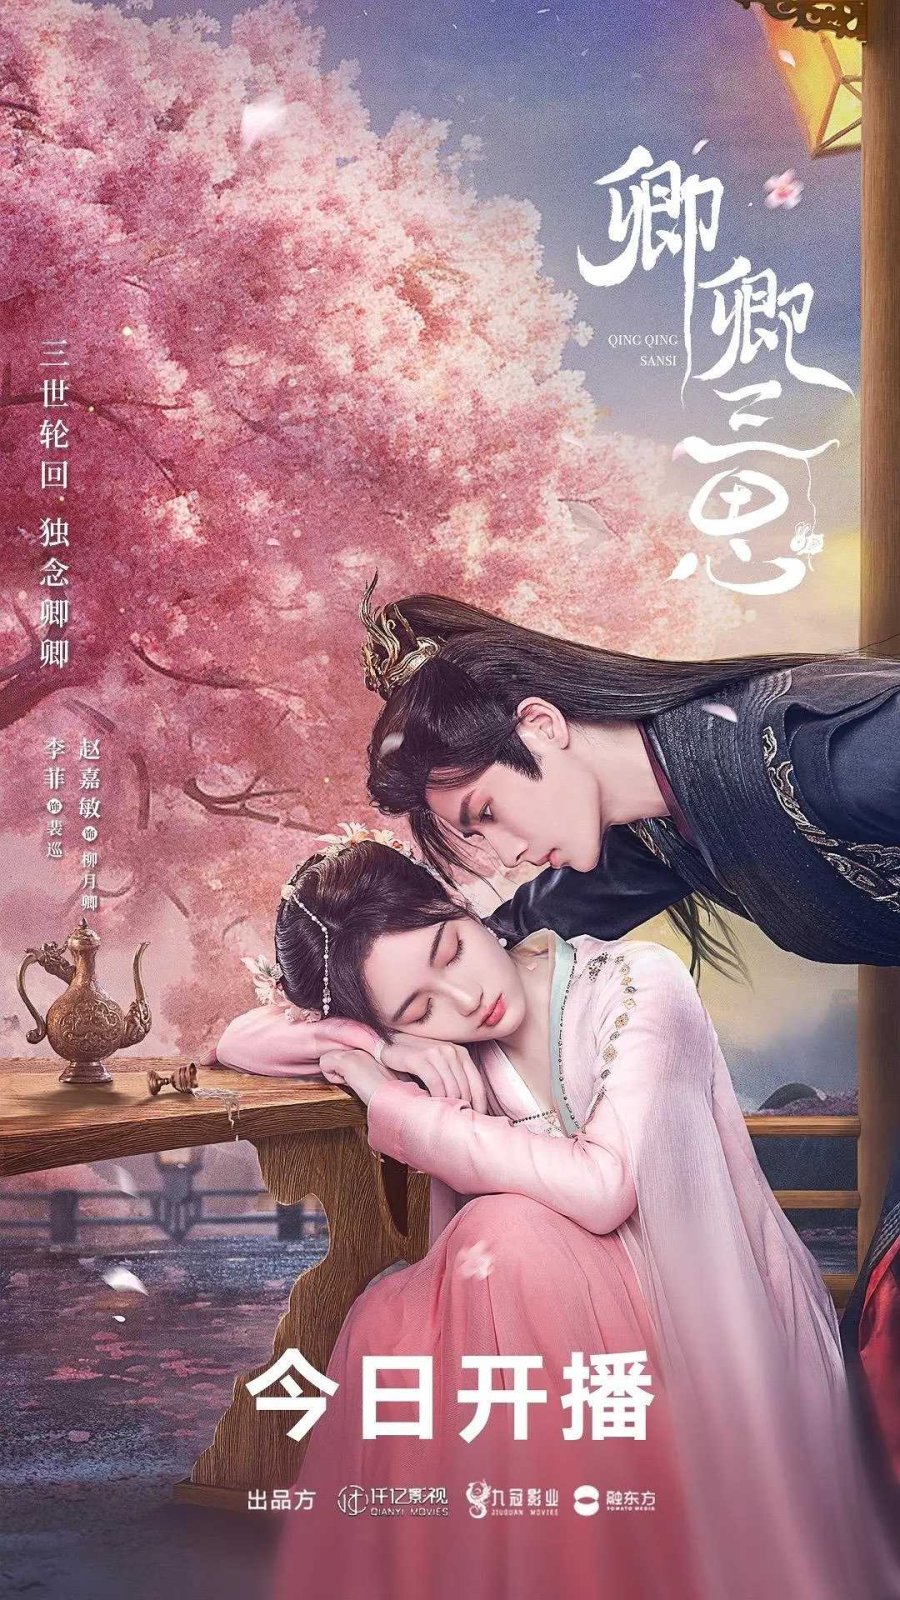 The Deliberations of Love/Qing Qing San Si with eng sub